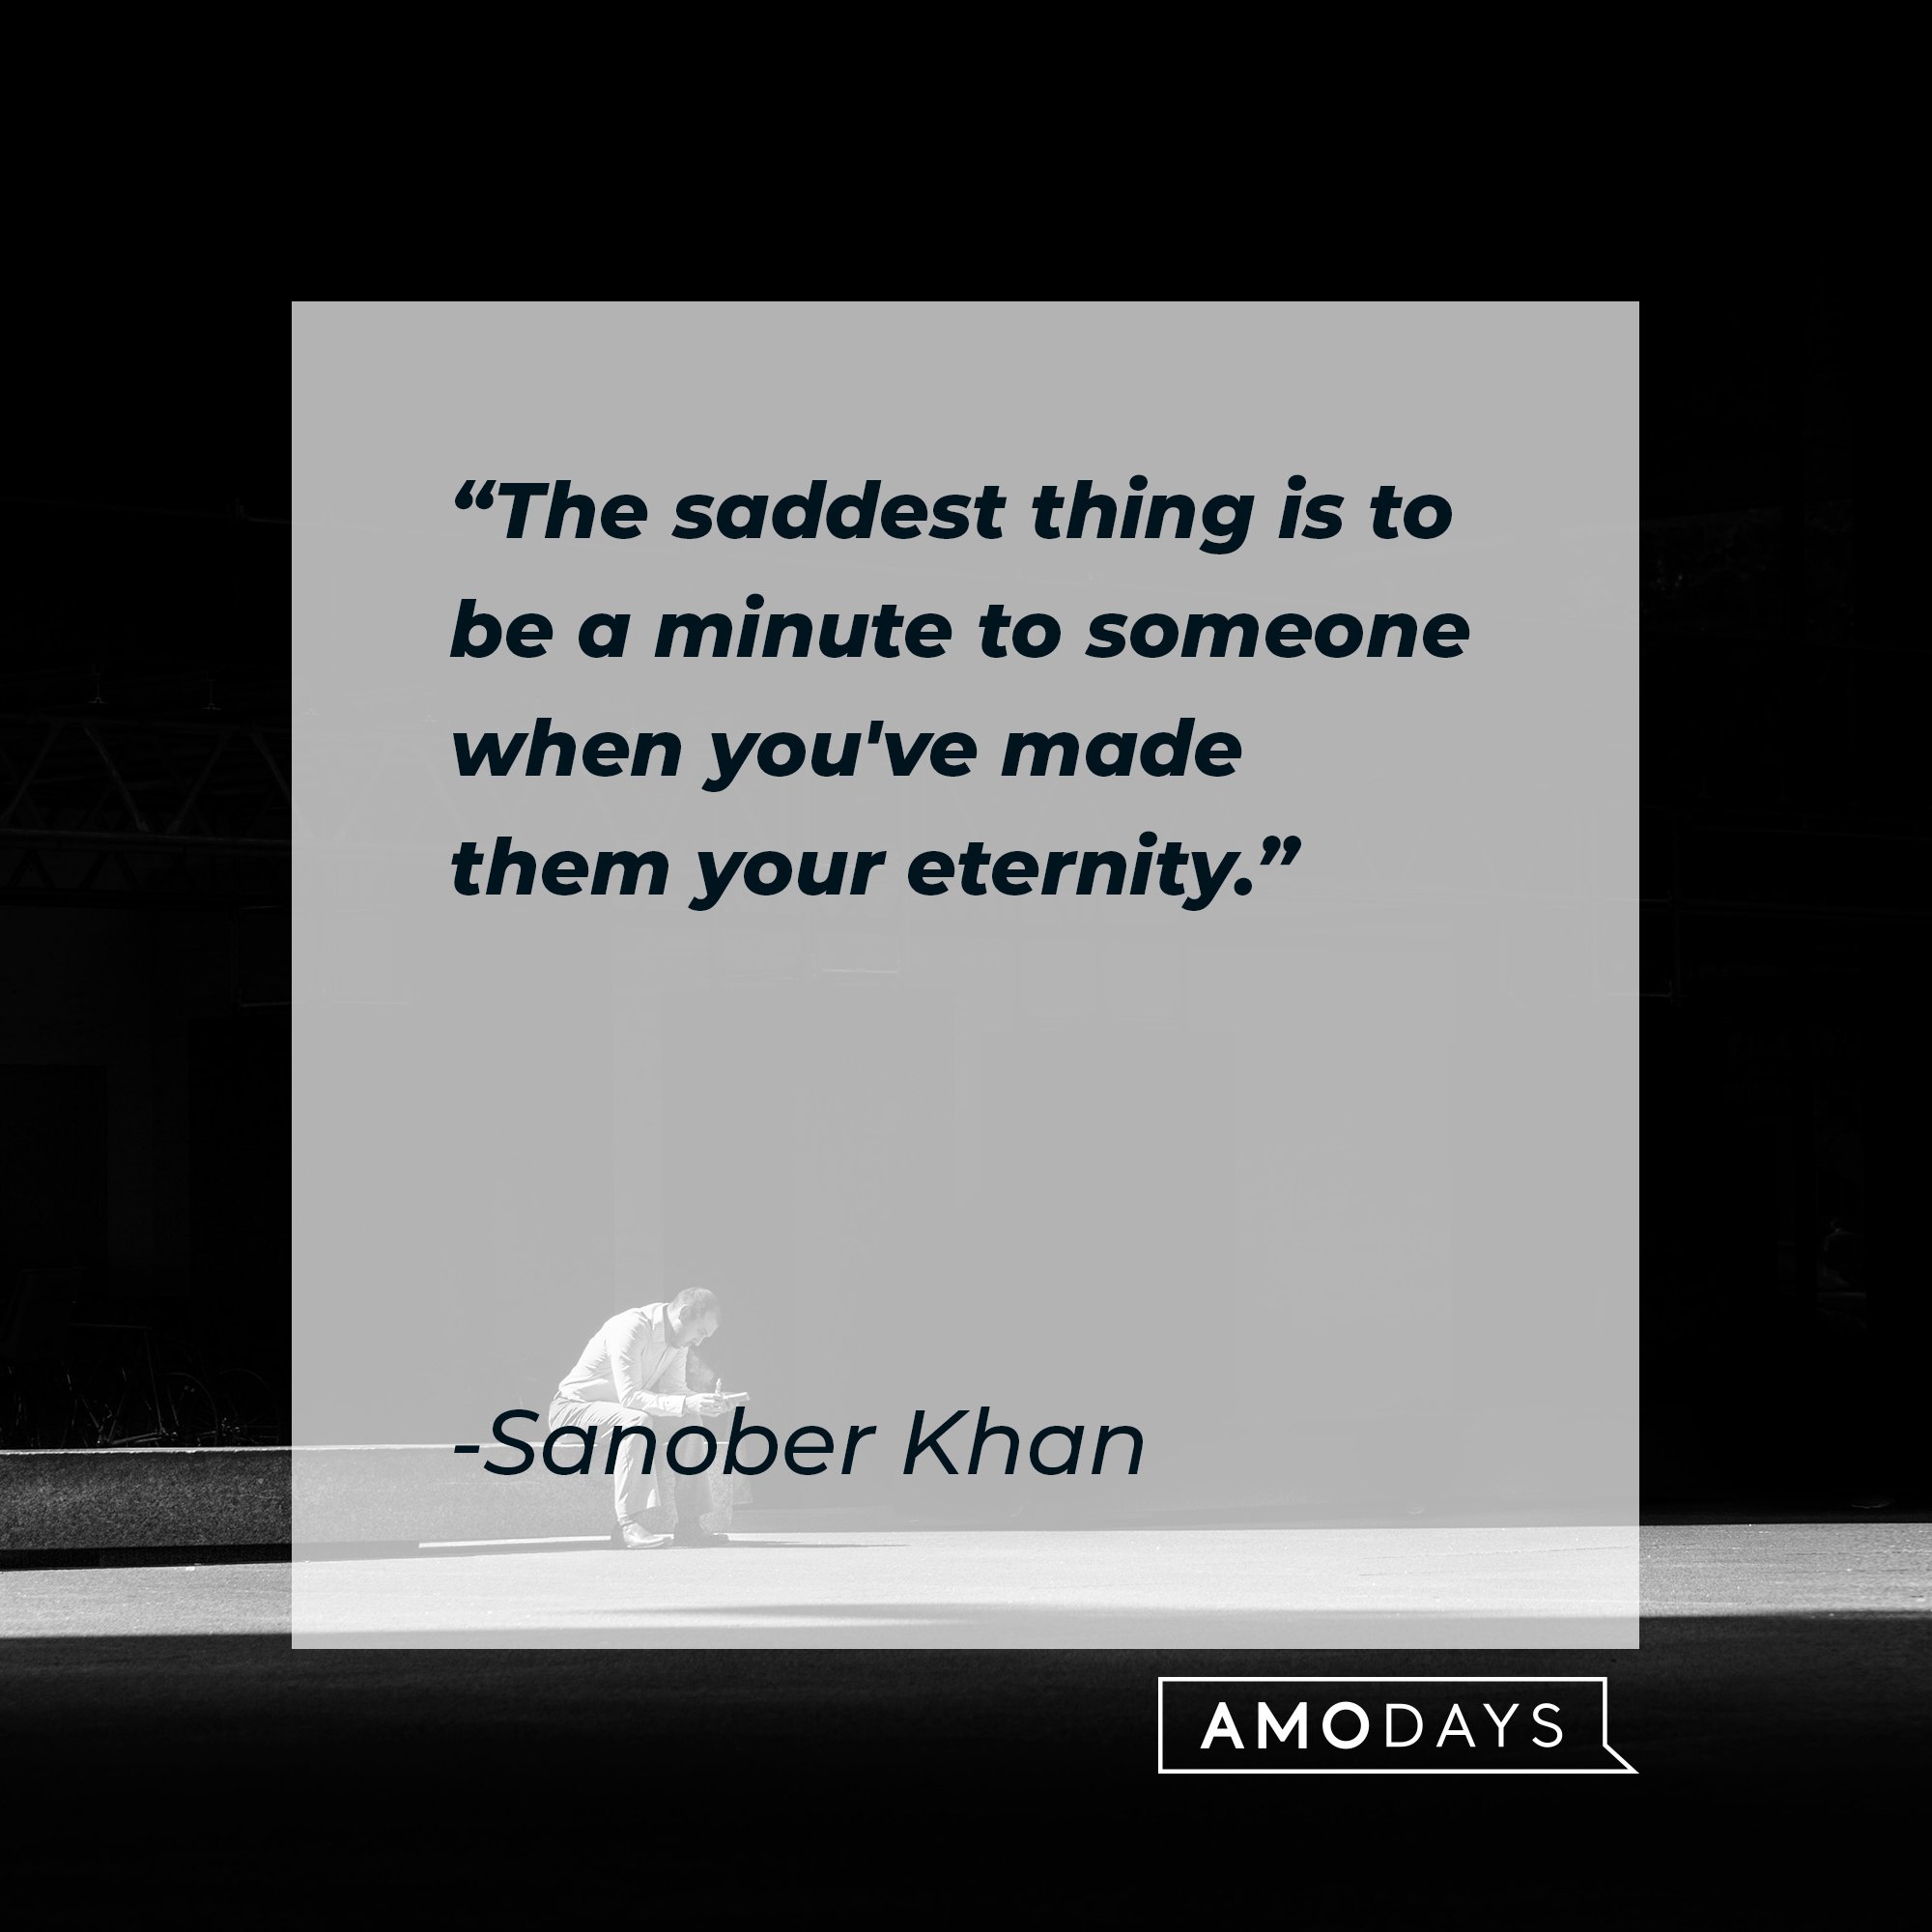 Sanober Khan's quote: "The saddest thing is to be a minute to someone when you've made them your eternity." | Image: AmoDays